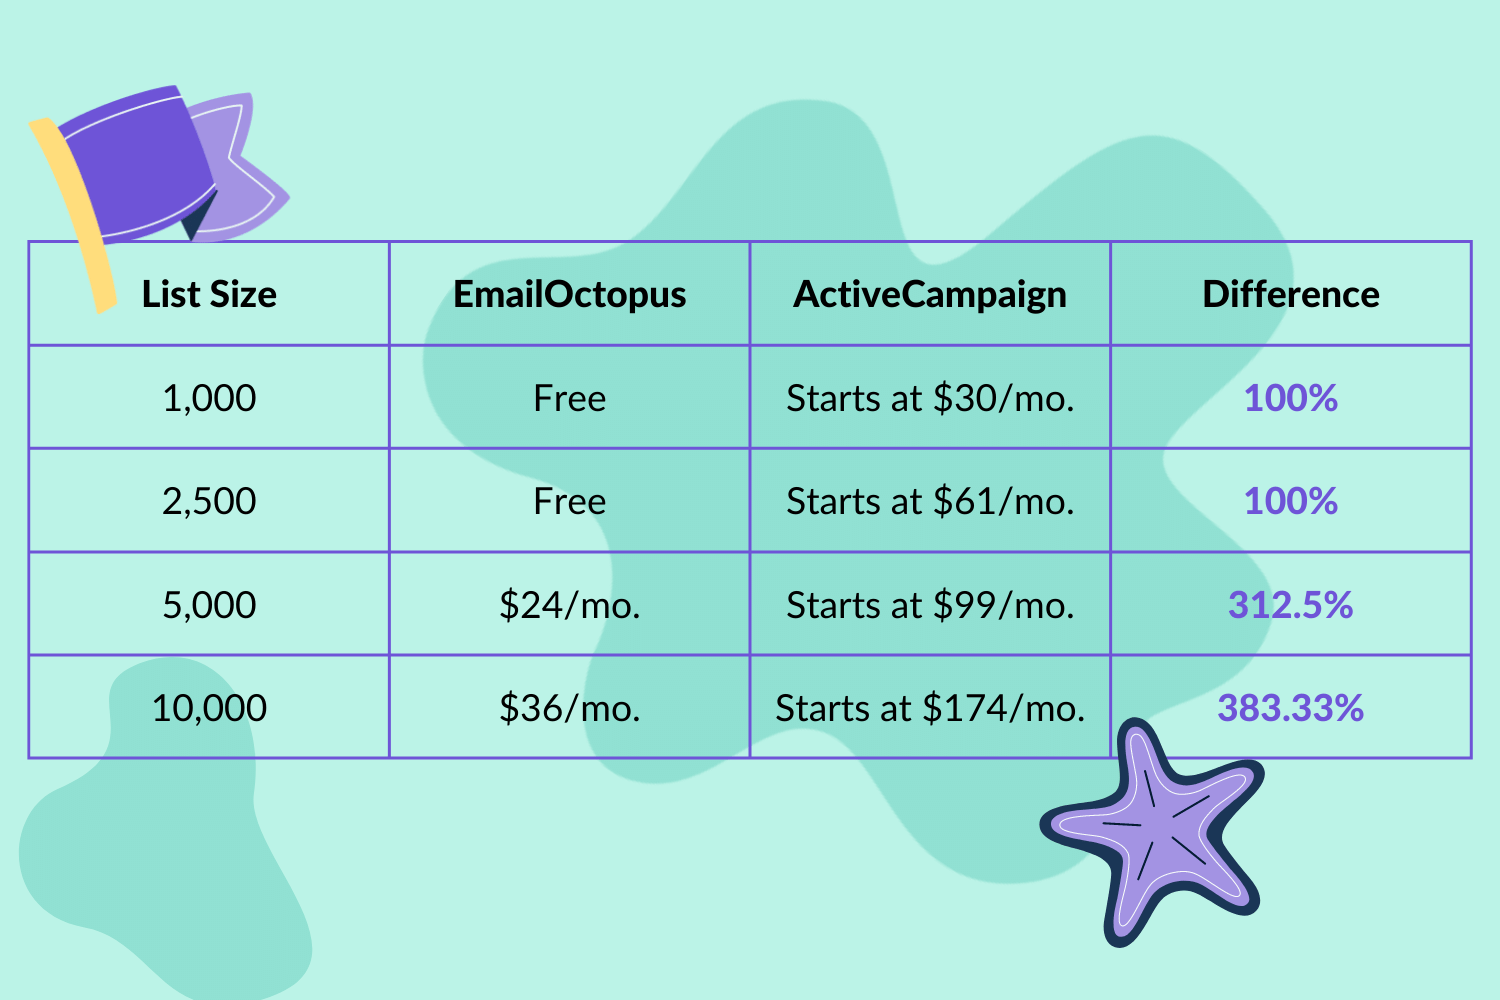 Pricing difference between EmailOctopus and ActiveCampaign